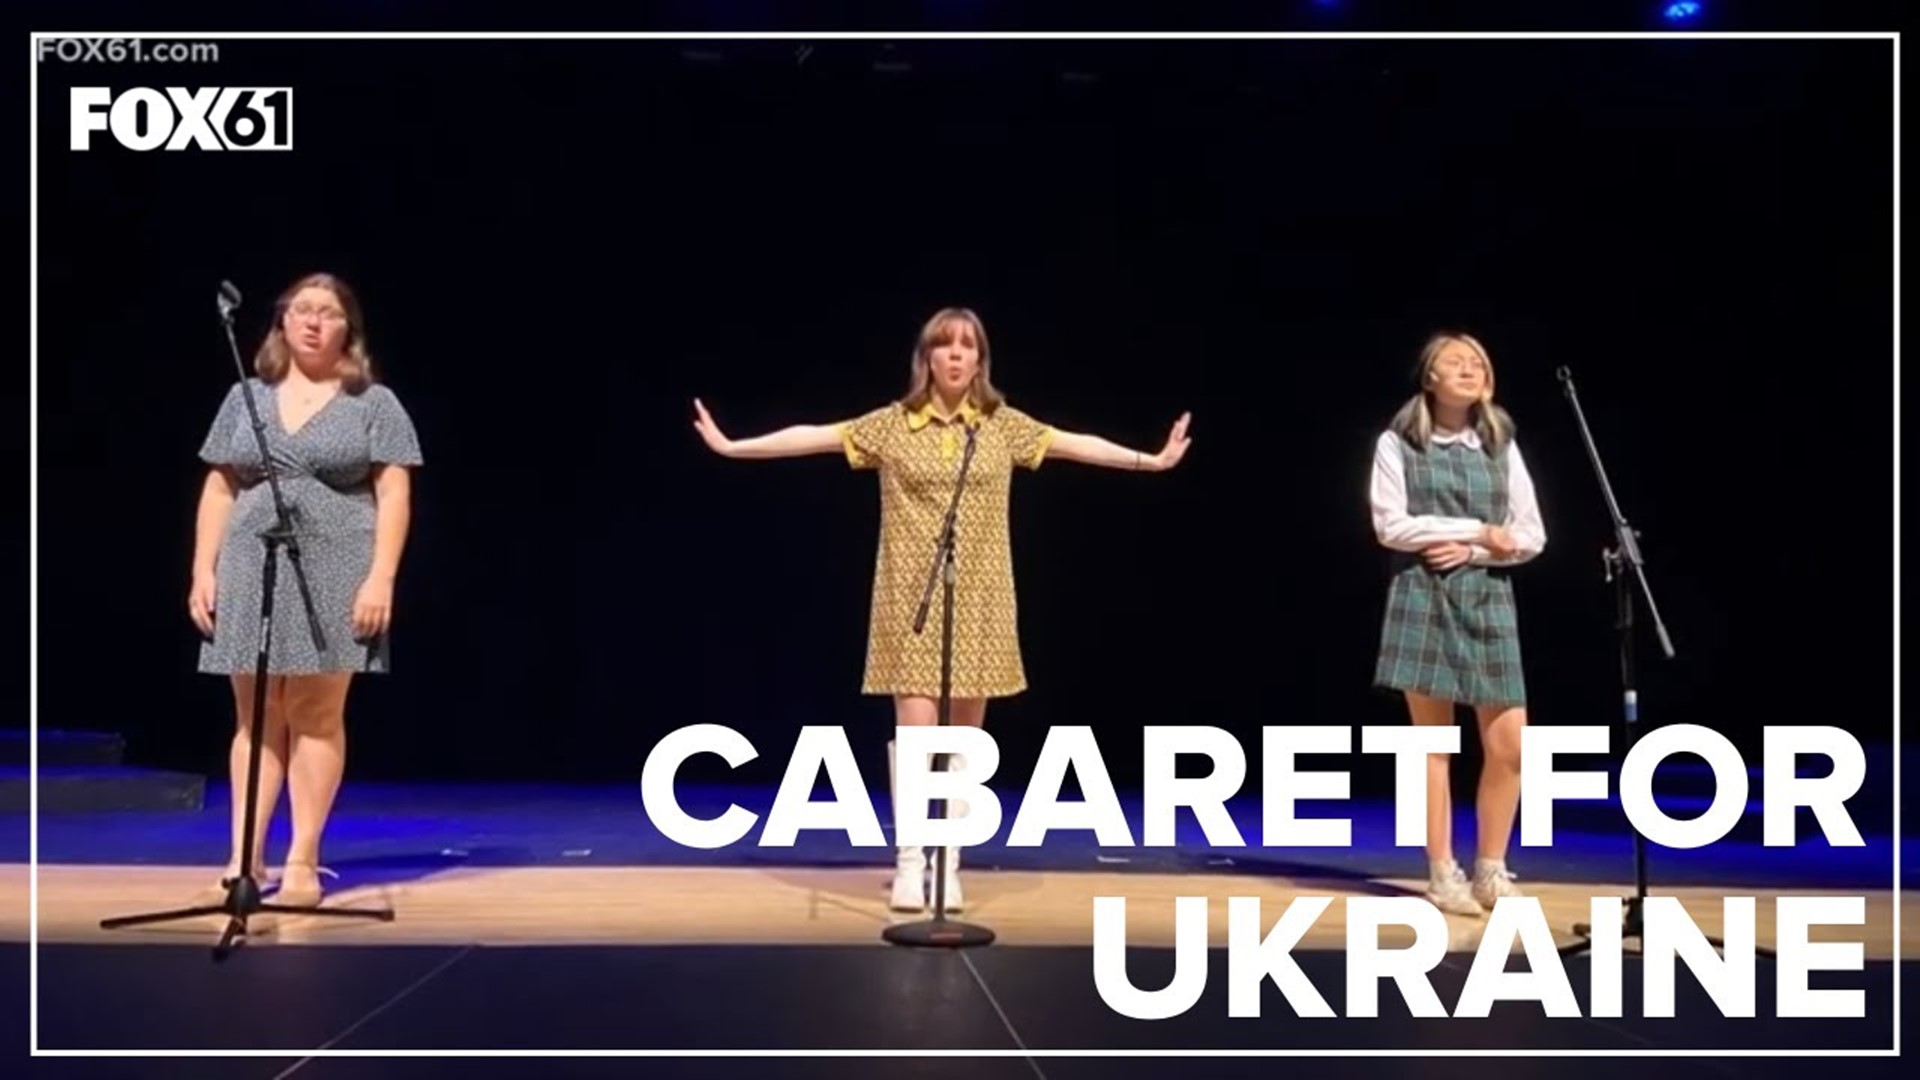 WHS Drama Club will host a dinner and performance Saturday, May 21, at 5:30 p.m. to help send meals to Ukraine.